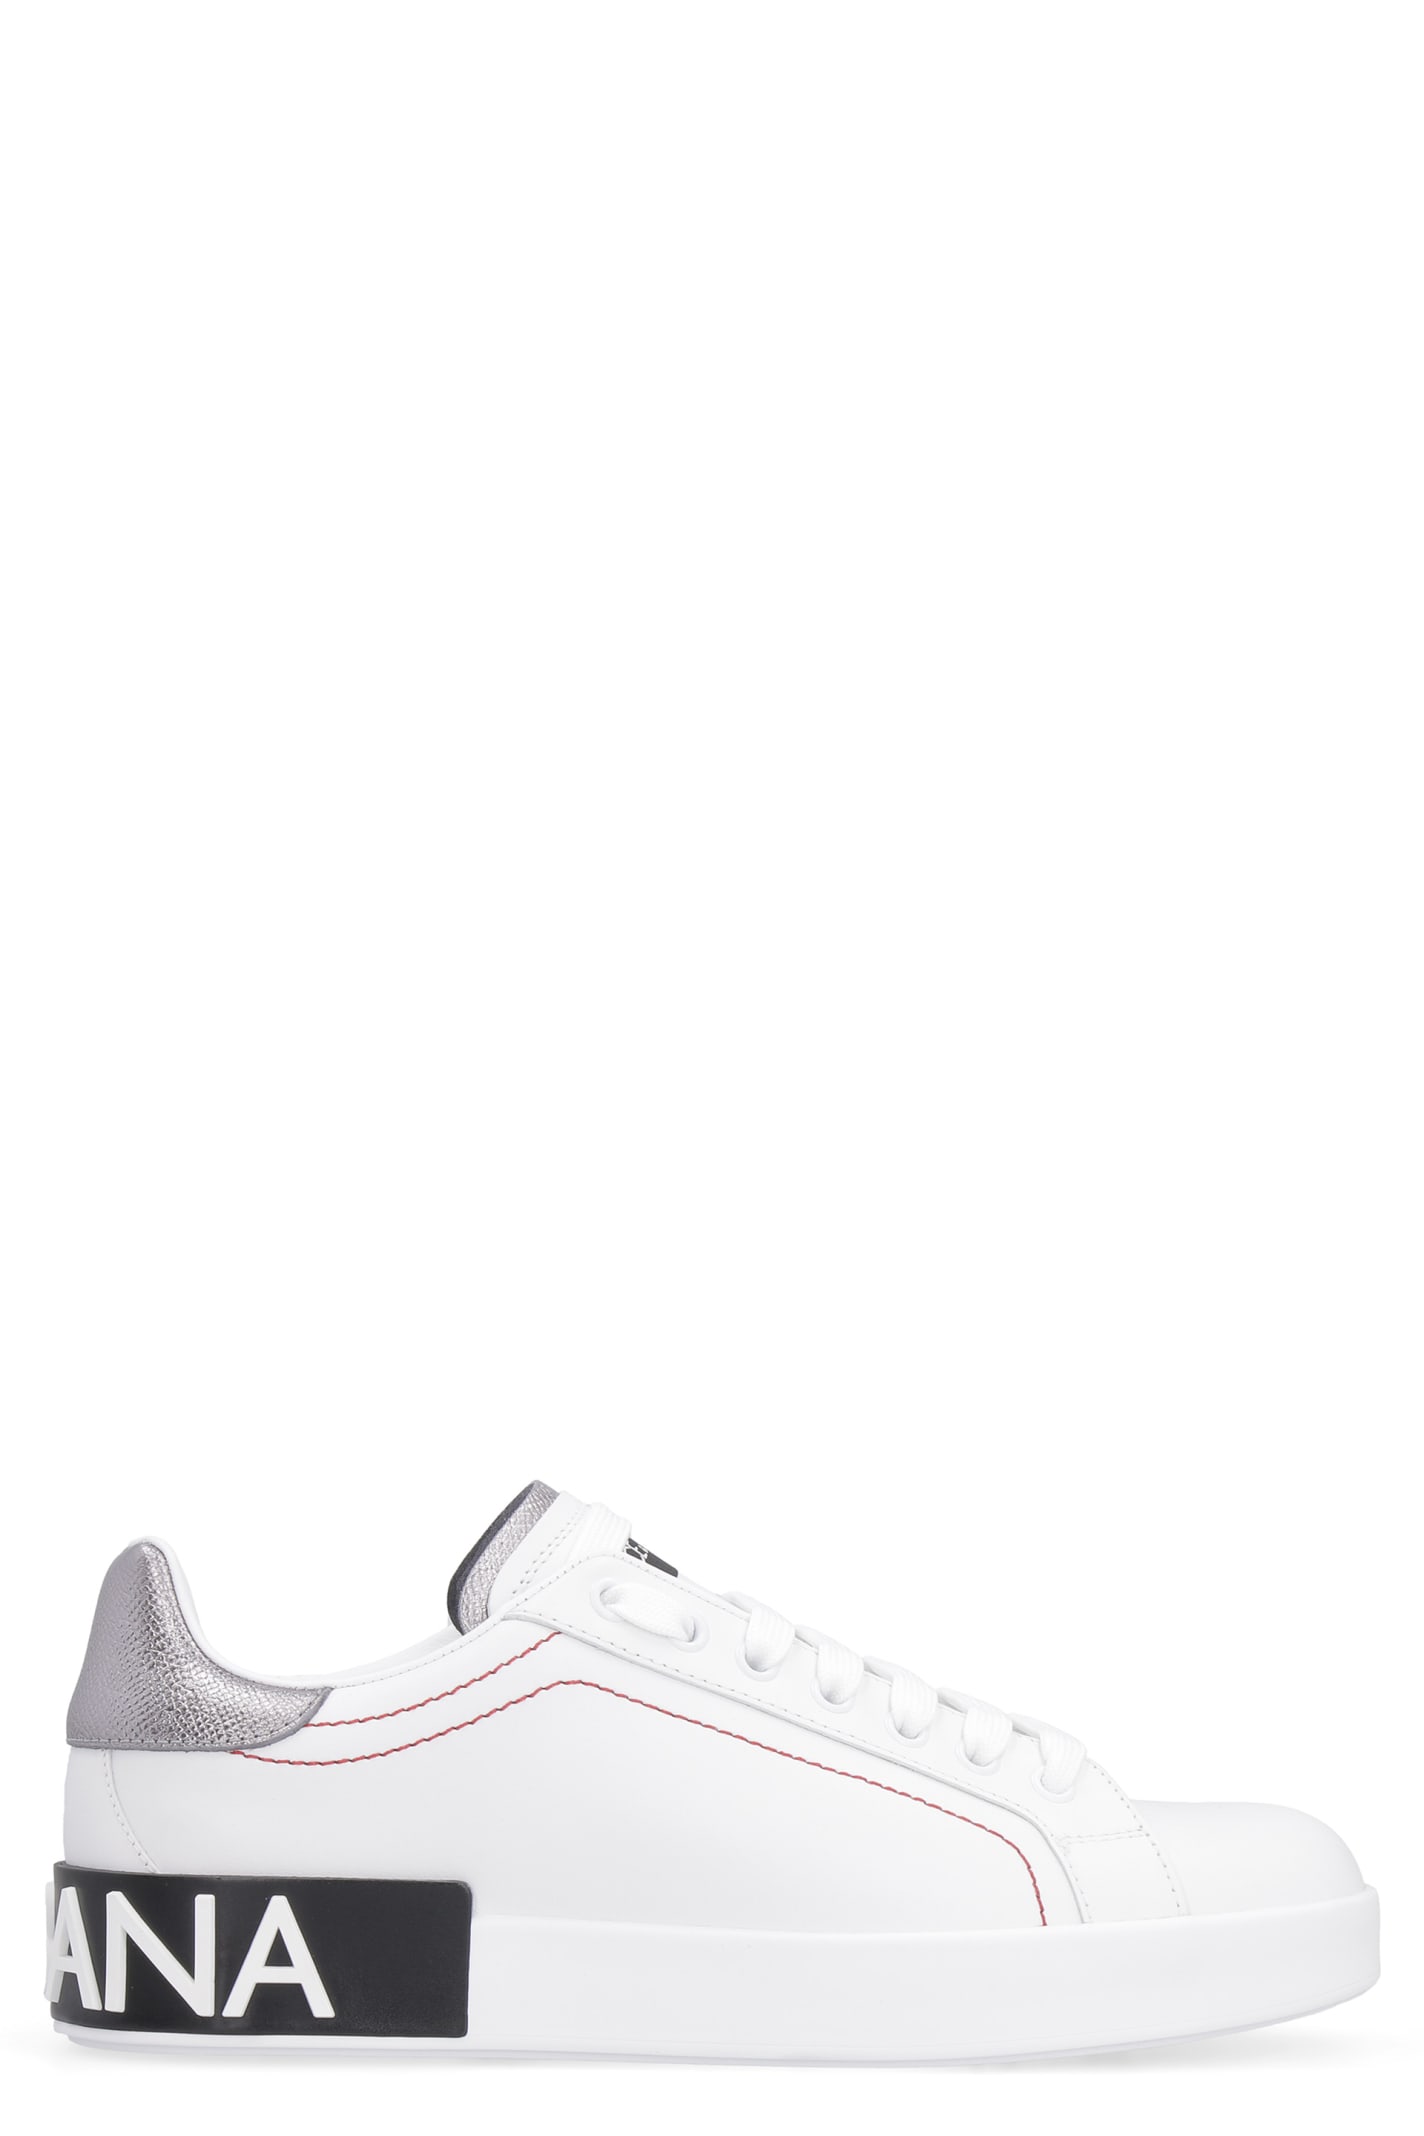 Dolce & Gabbana Leather Low-top Sneakers In White